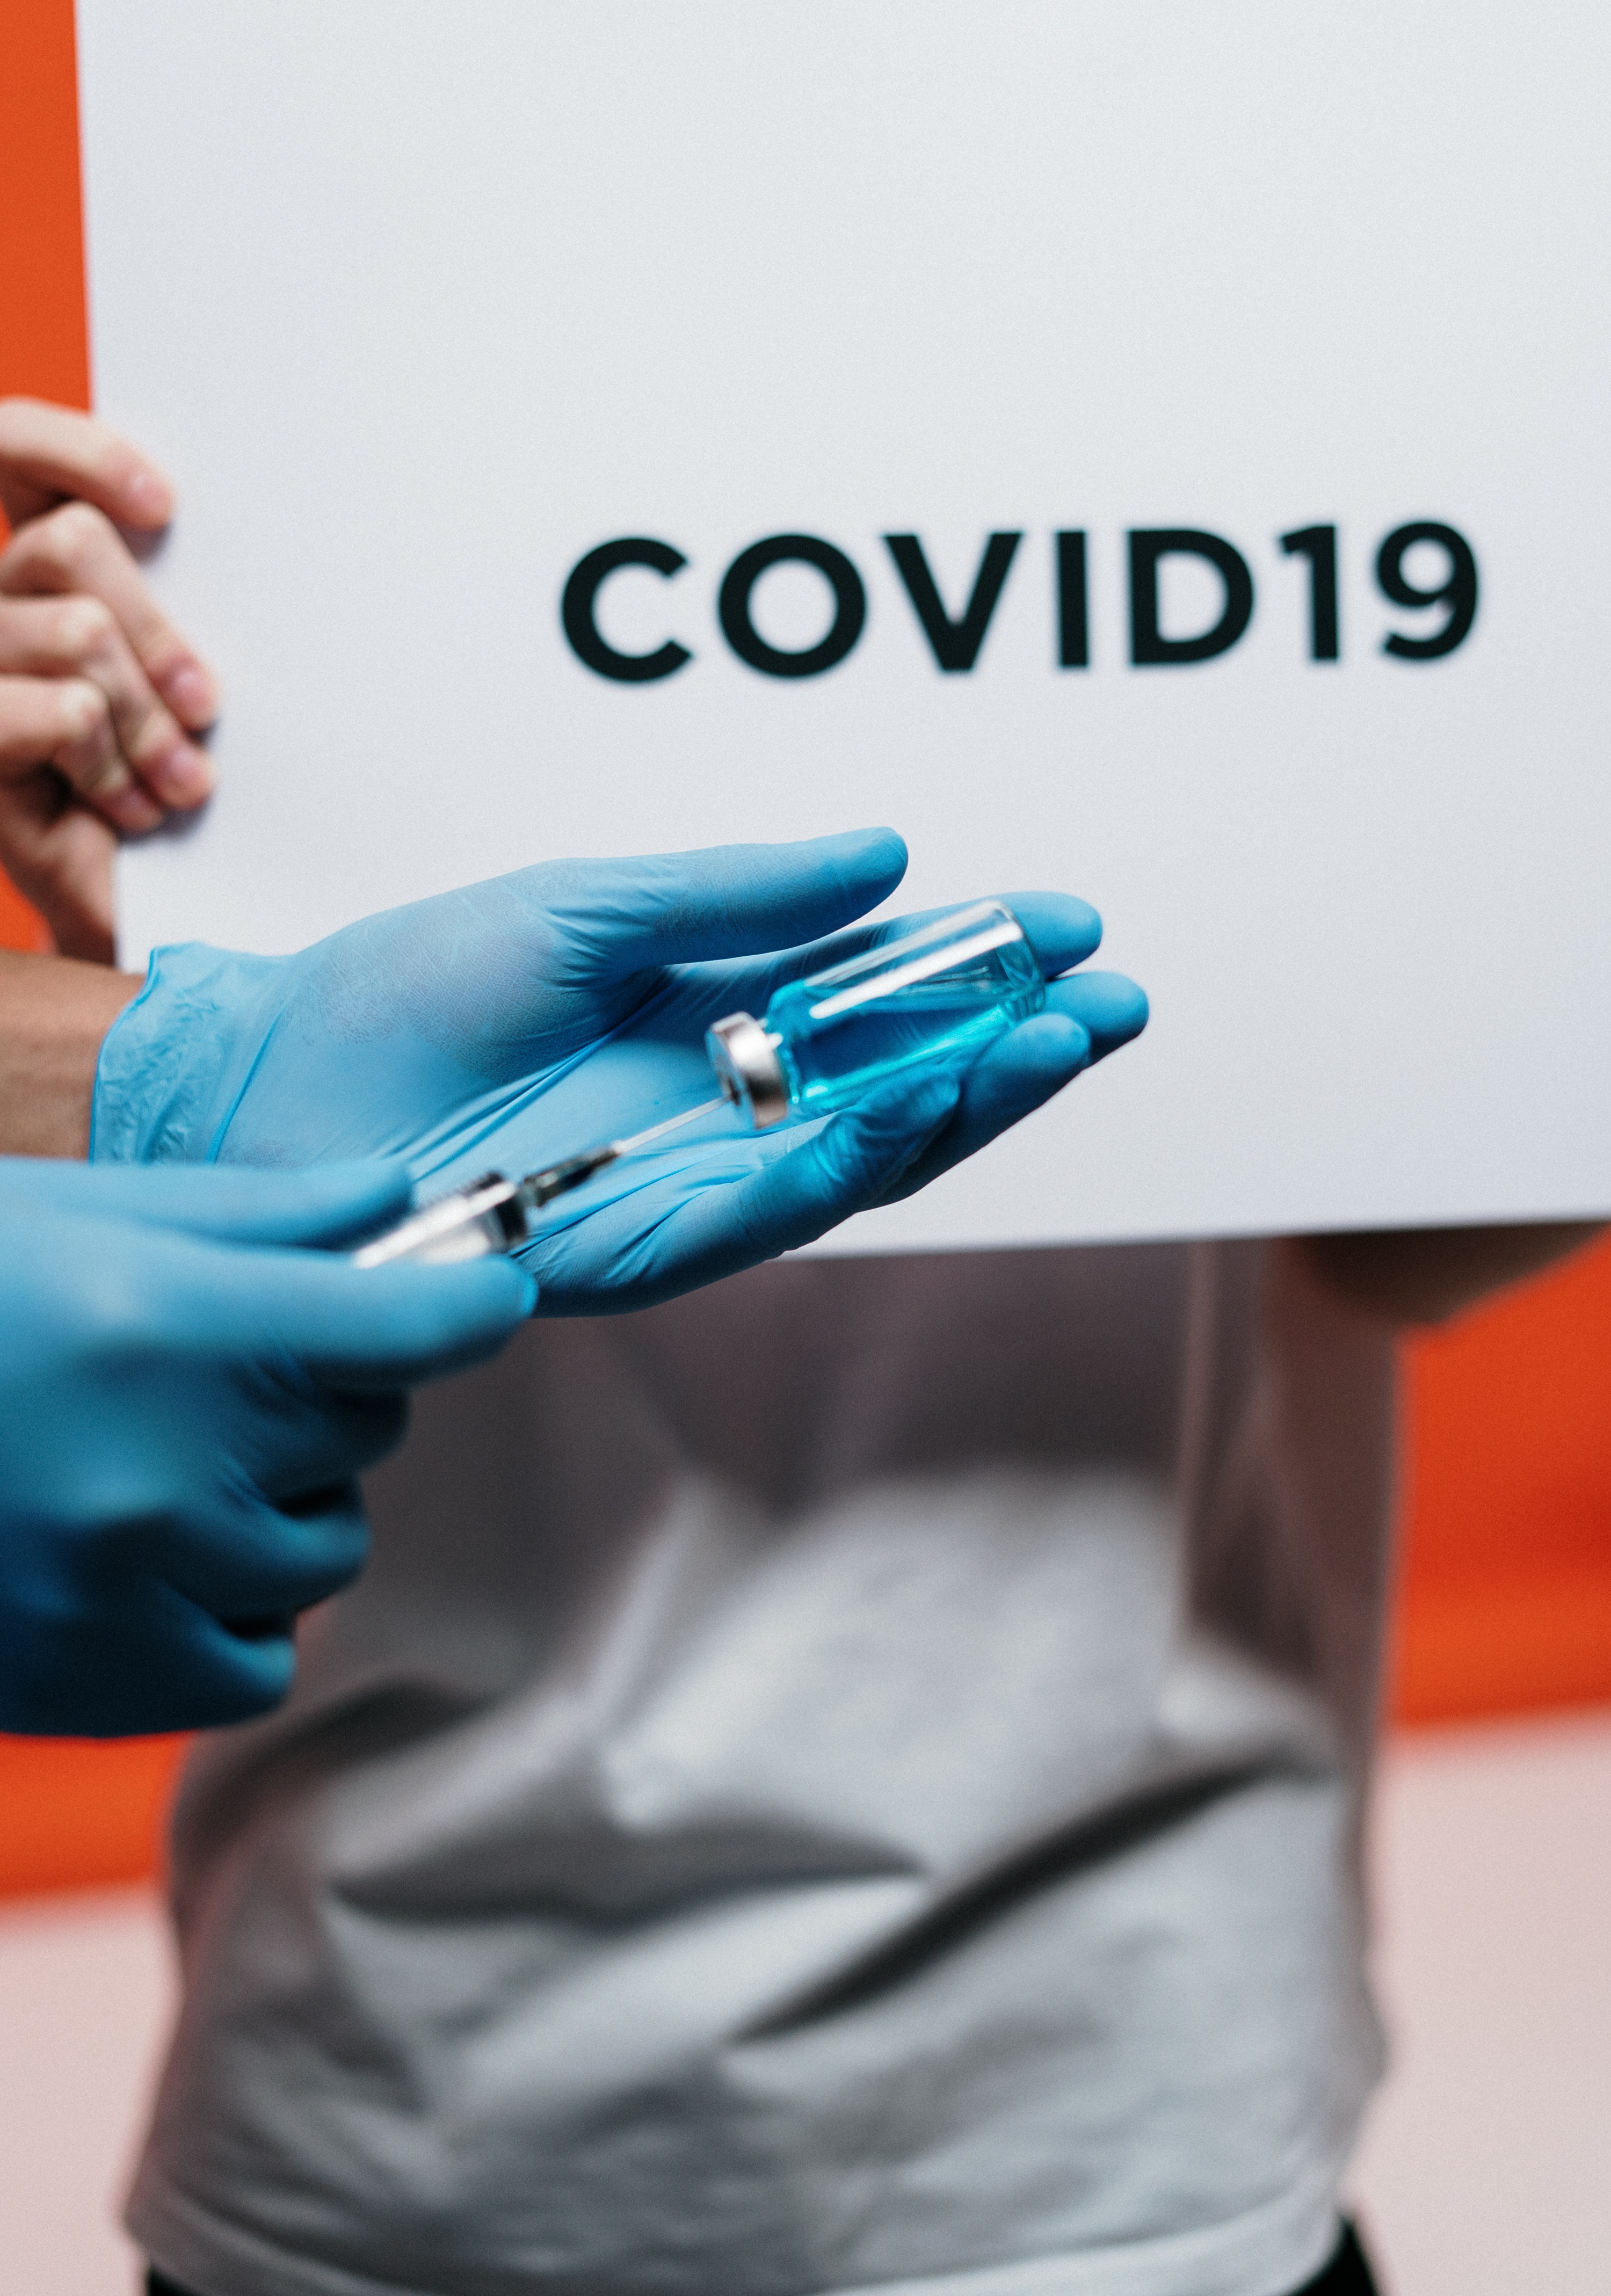 Covid-19: What's Australia's role in getting a vaccine to the world?